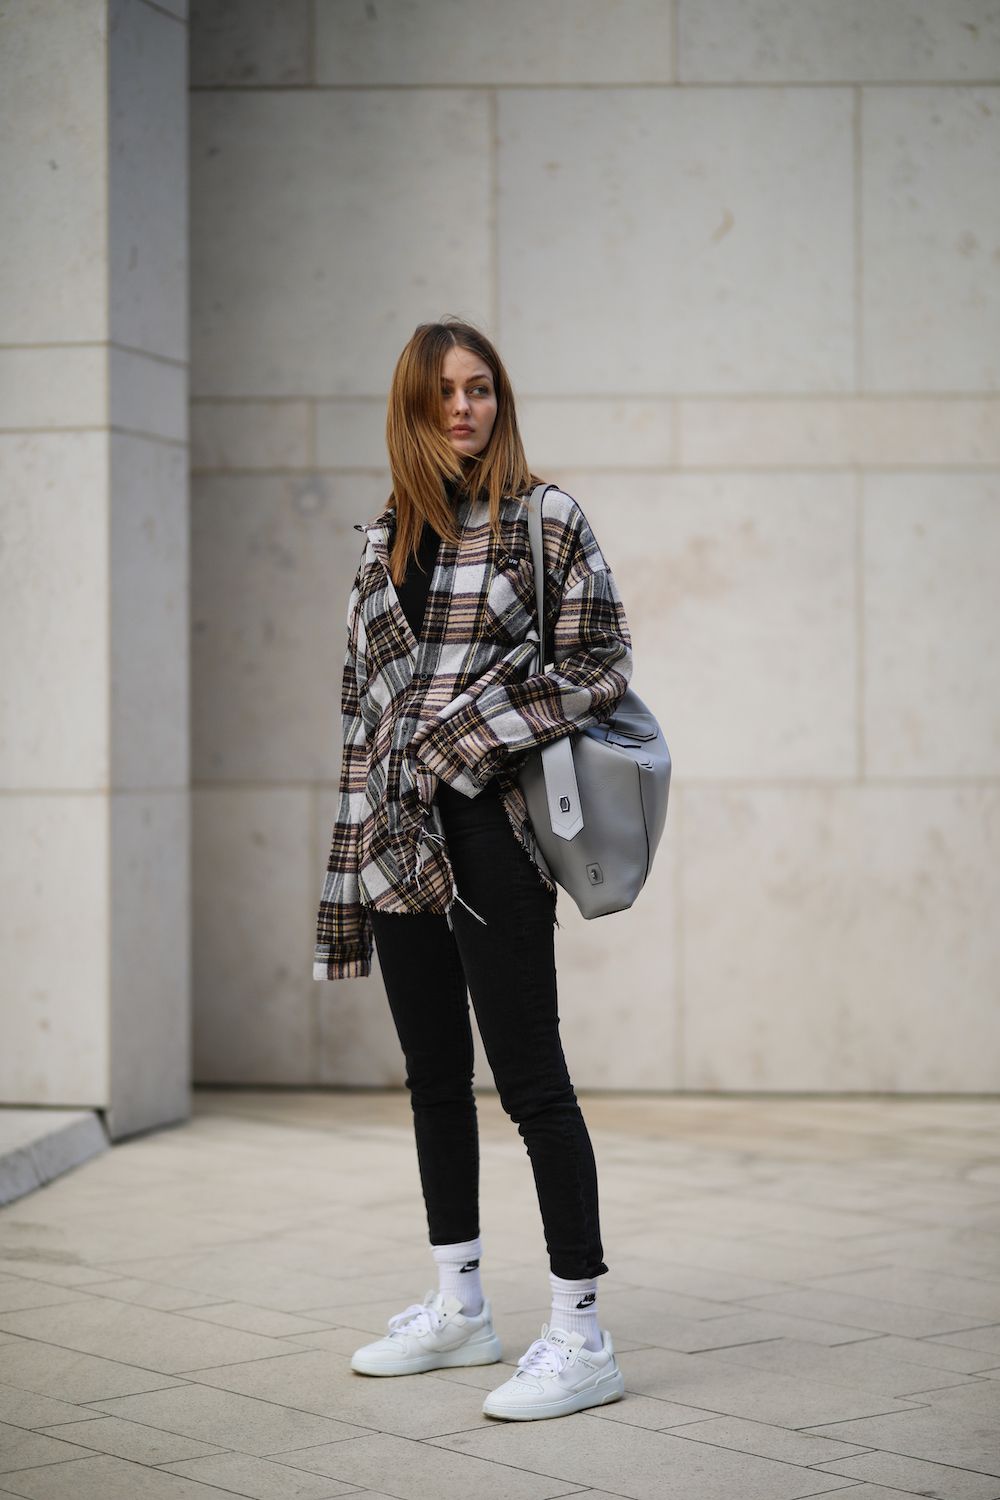 Best Flannel Outfits 2023 - Cute Ways to Wear Plaid Shirts